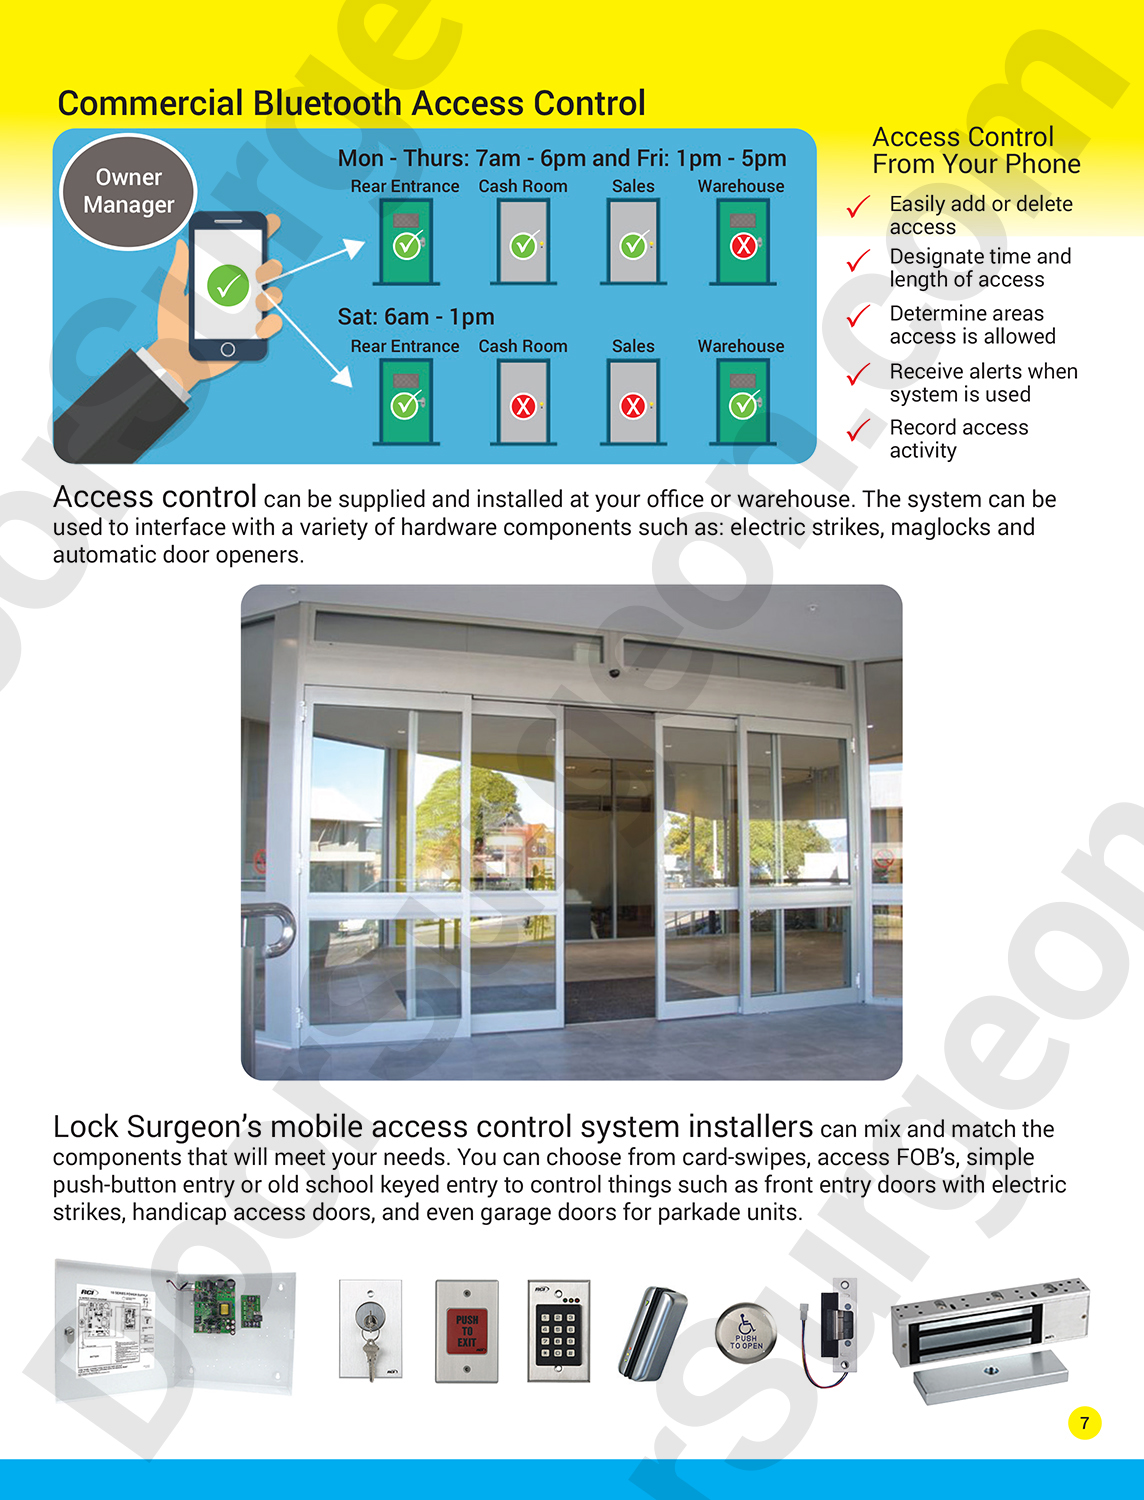 Door Surgeon bluetooth access control system solutions for commercial industrial door entry access.